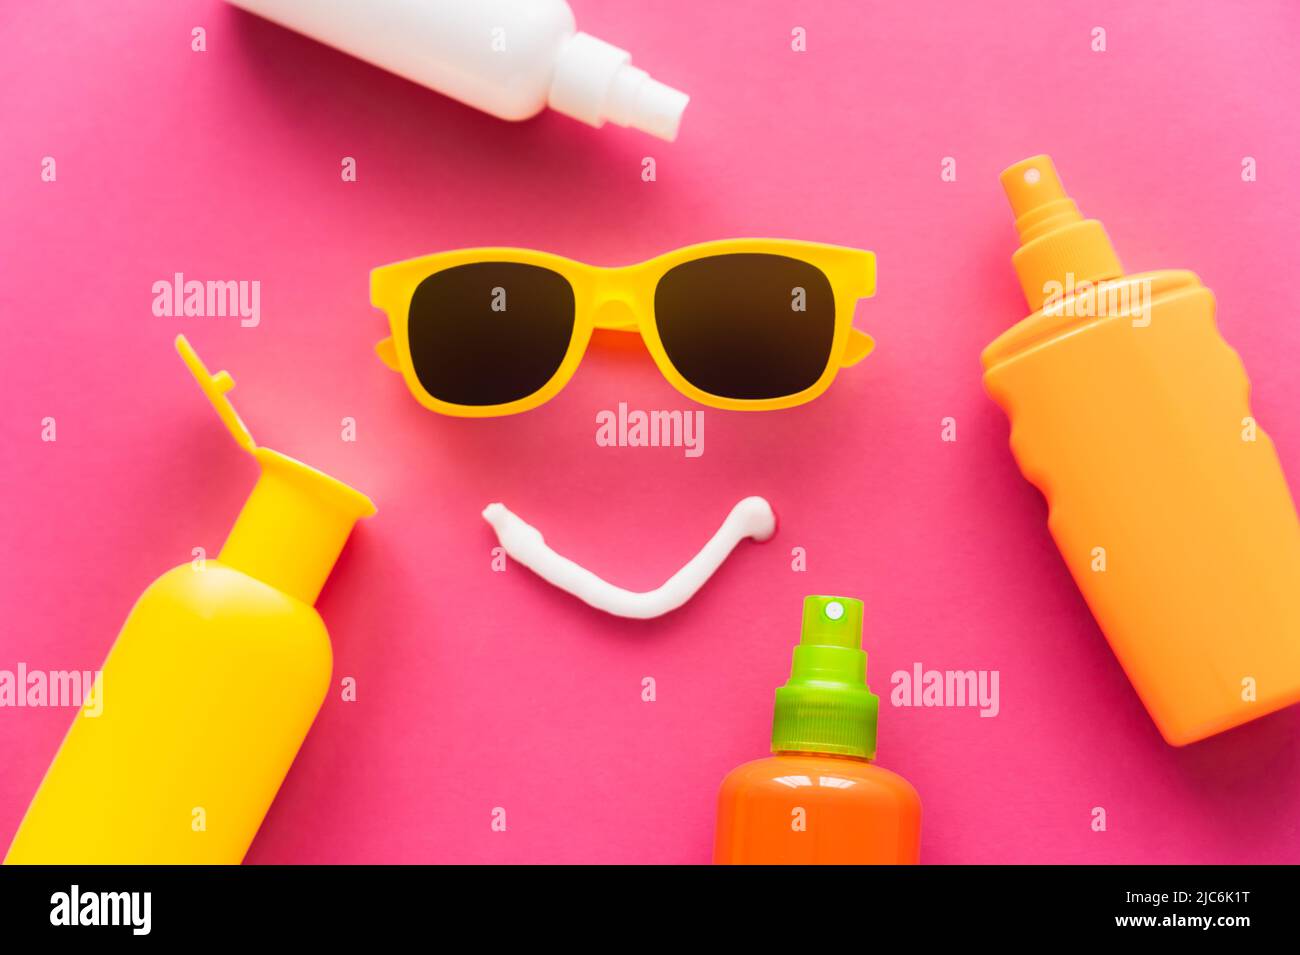 Top view of sunglasses near bottles of sunscreens on pink background Stock Photo